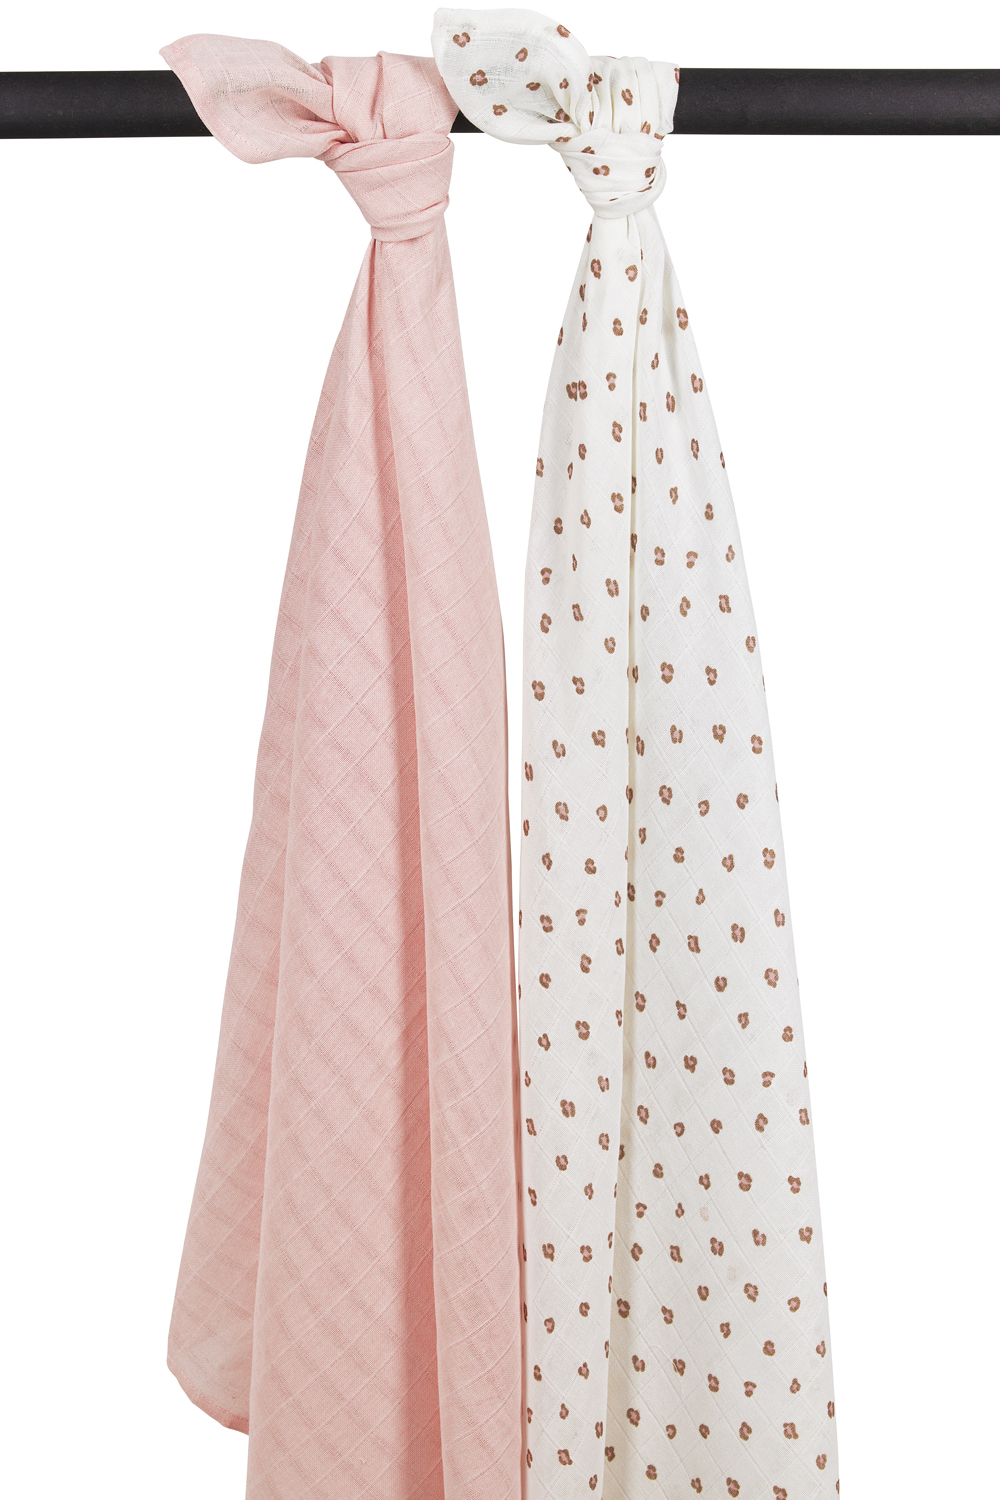 Swaddle 2-pack muslin Mini Panther - soft pink - 120x120cm